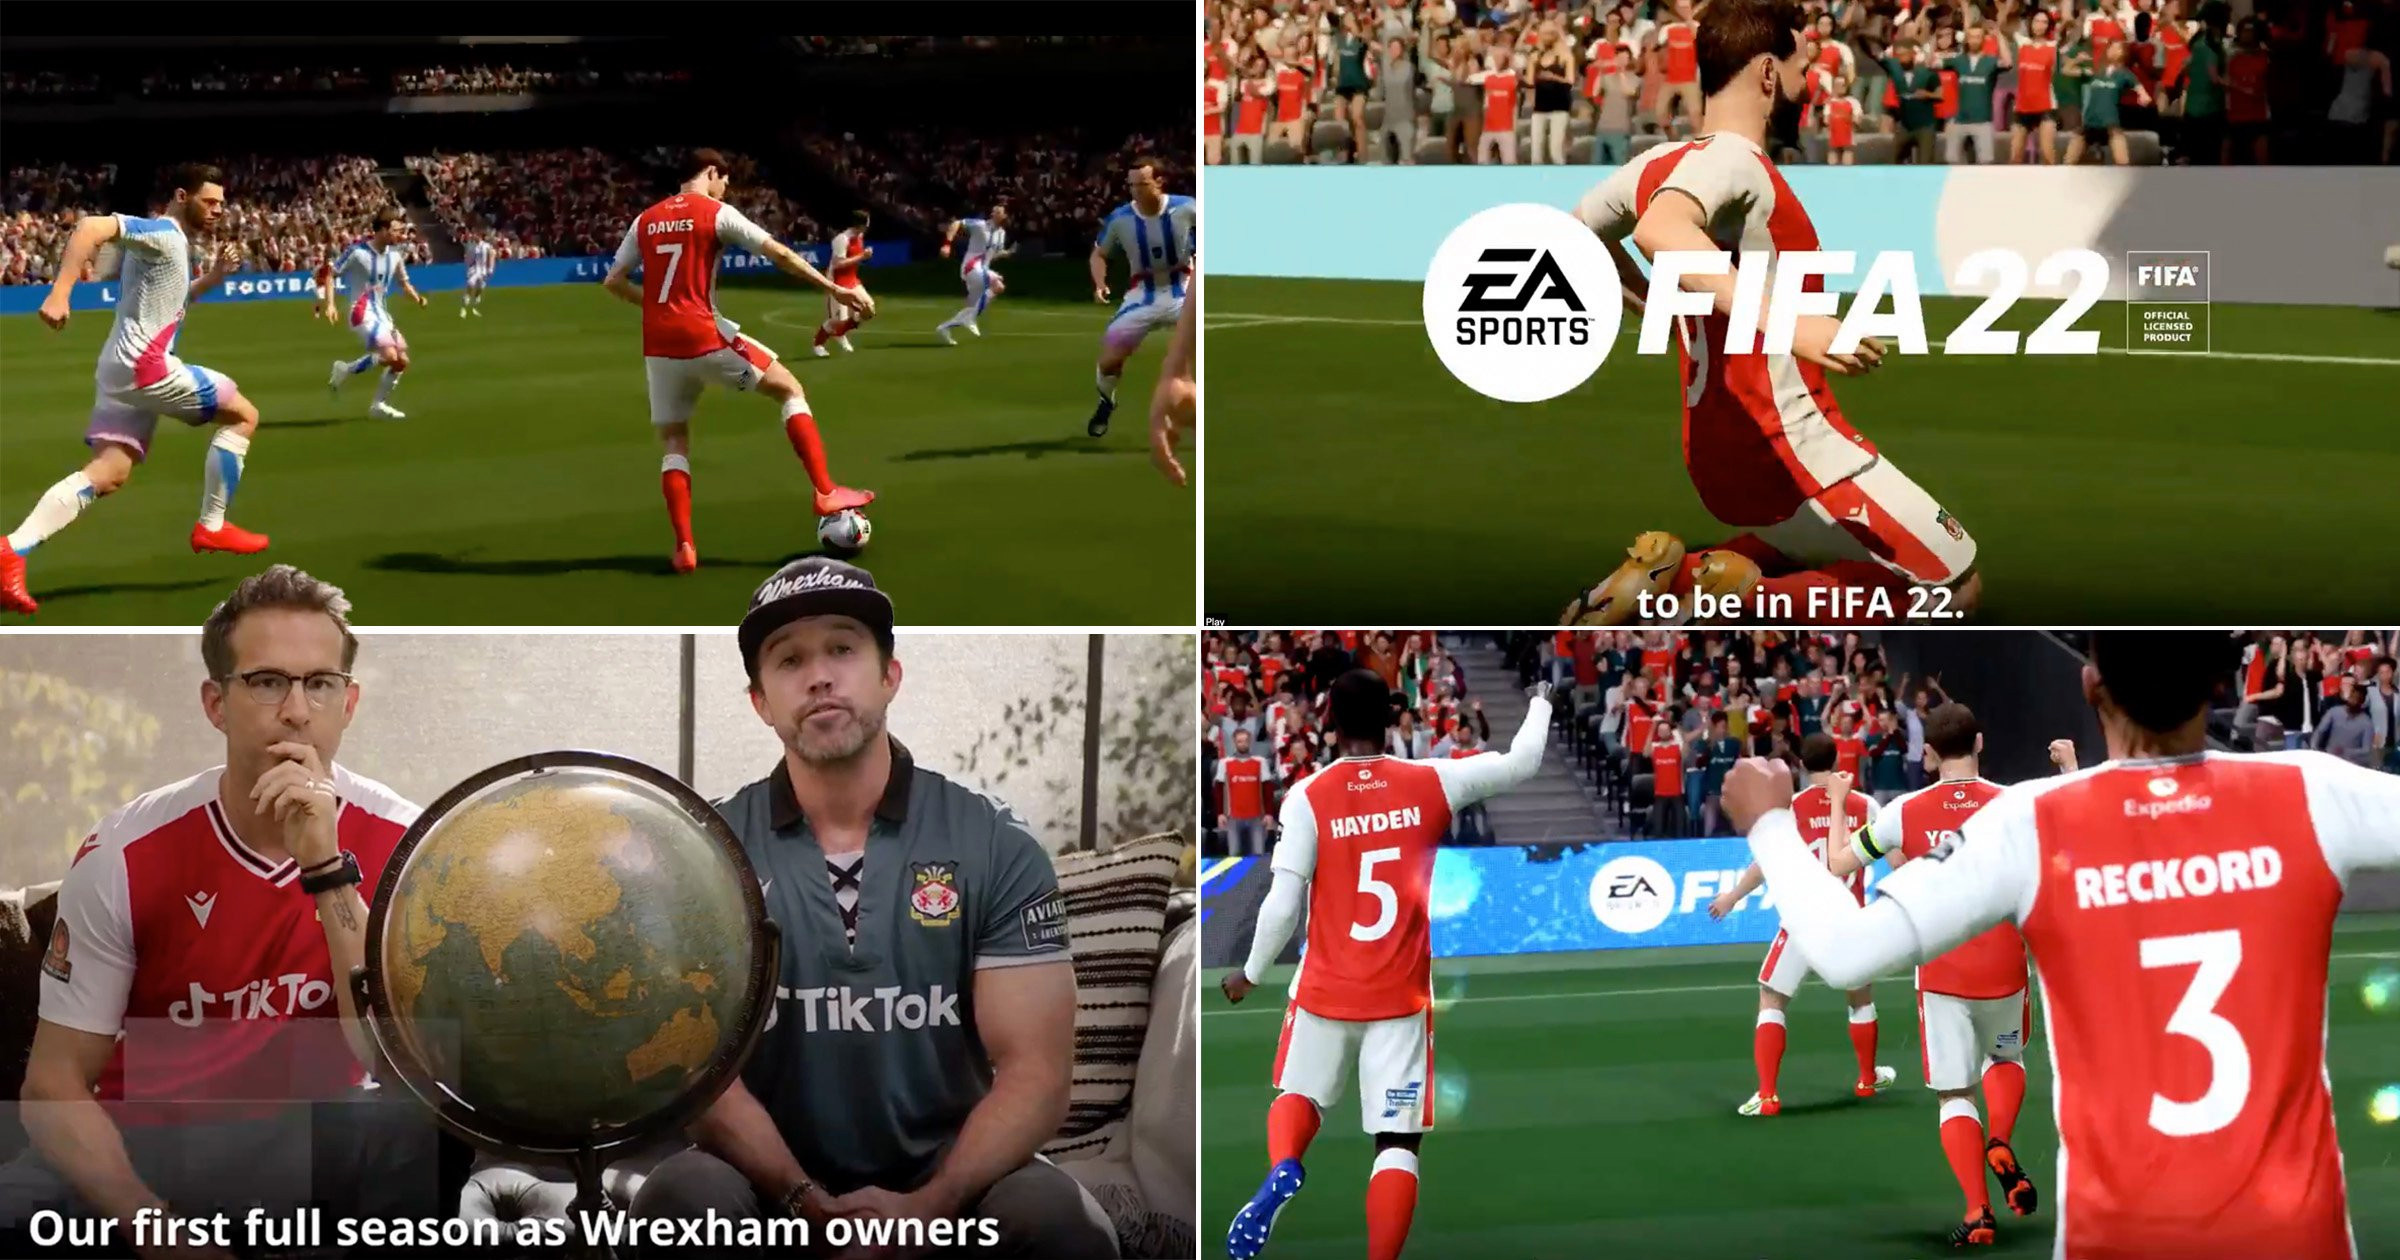 Ryan Reynolds and Rob McElhenney announce Wrexham is in FIFA 22 in their trademark style